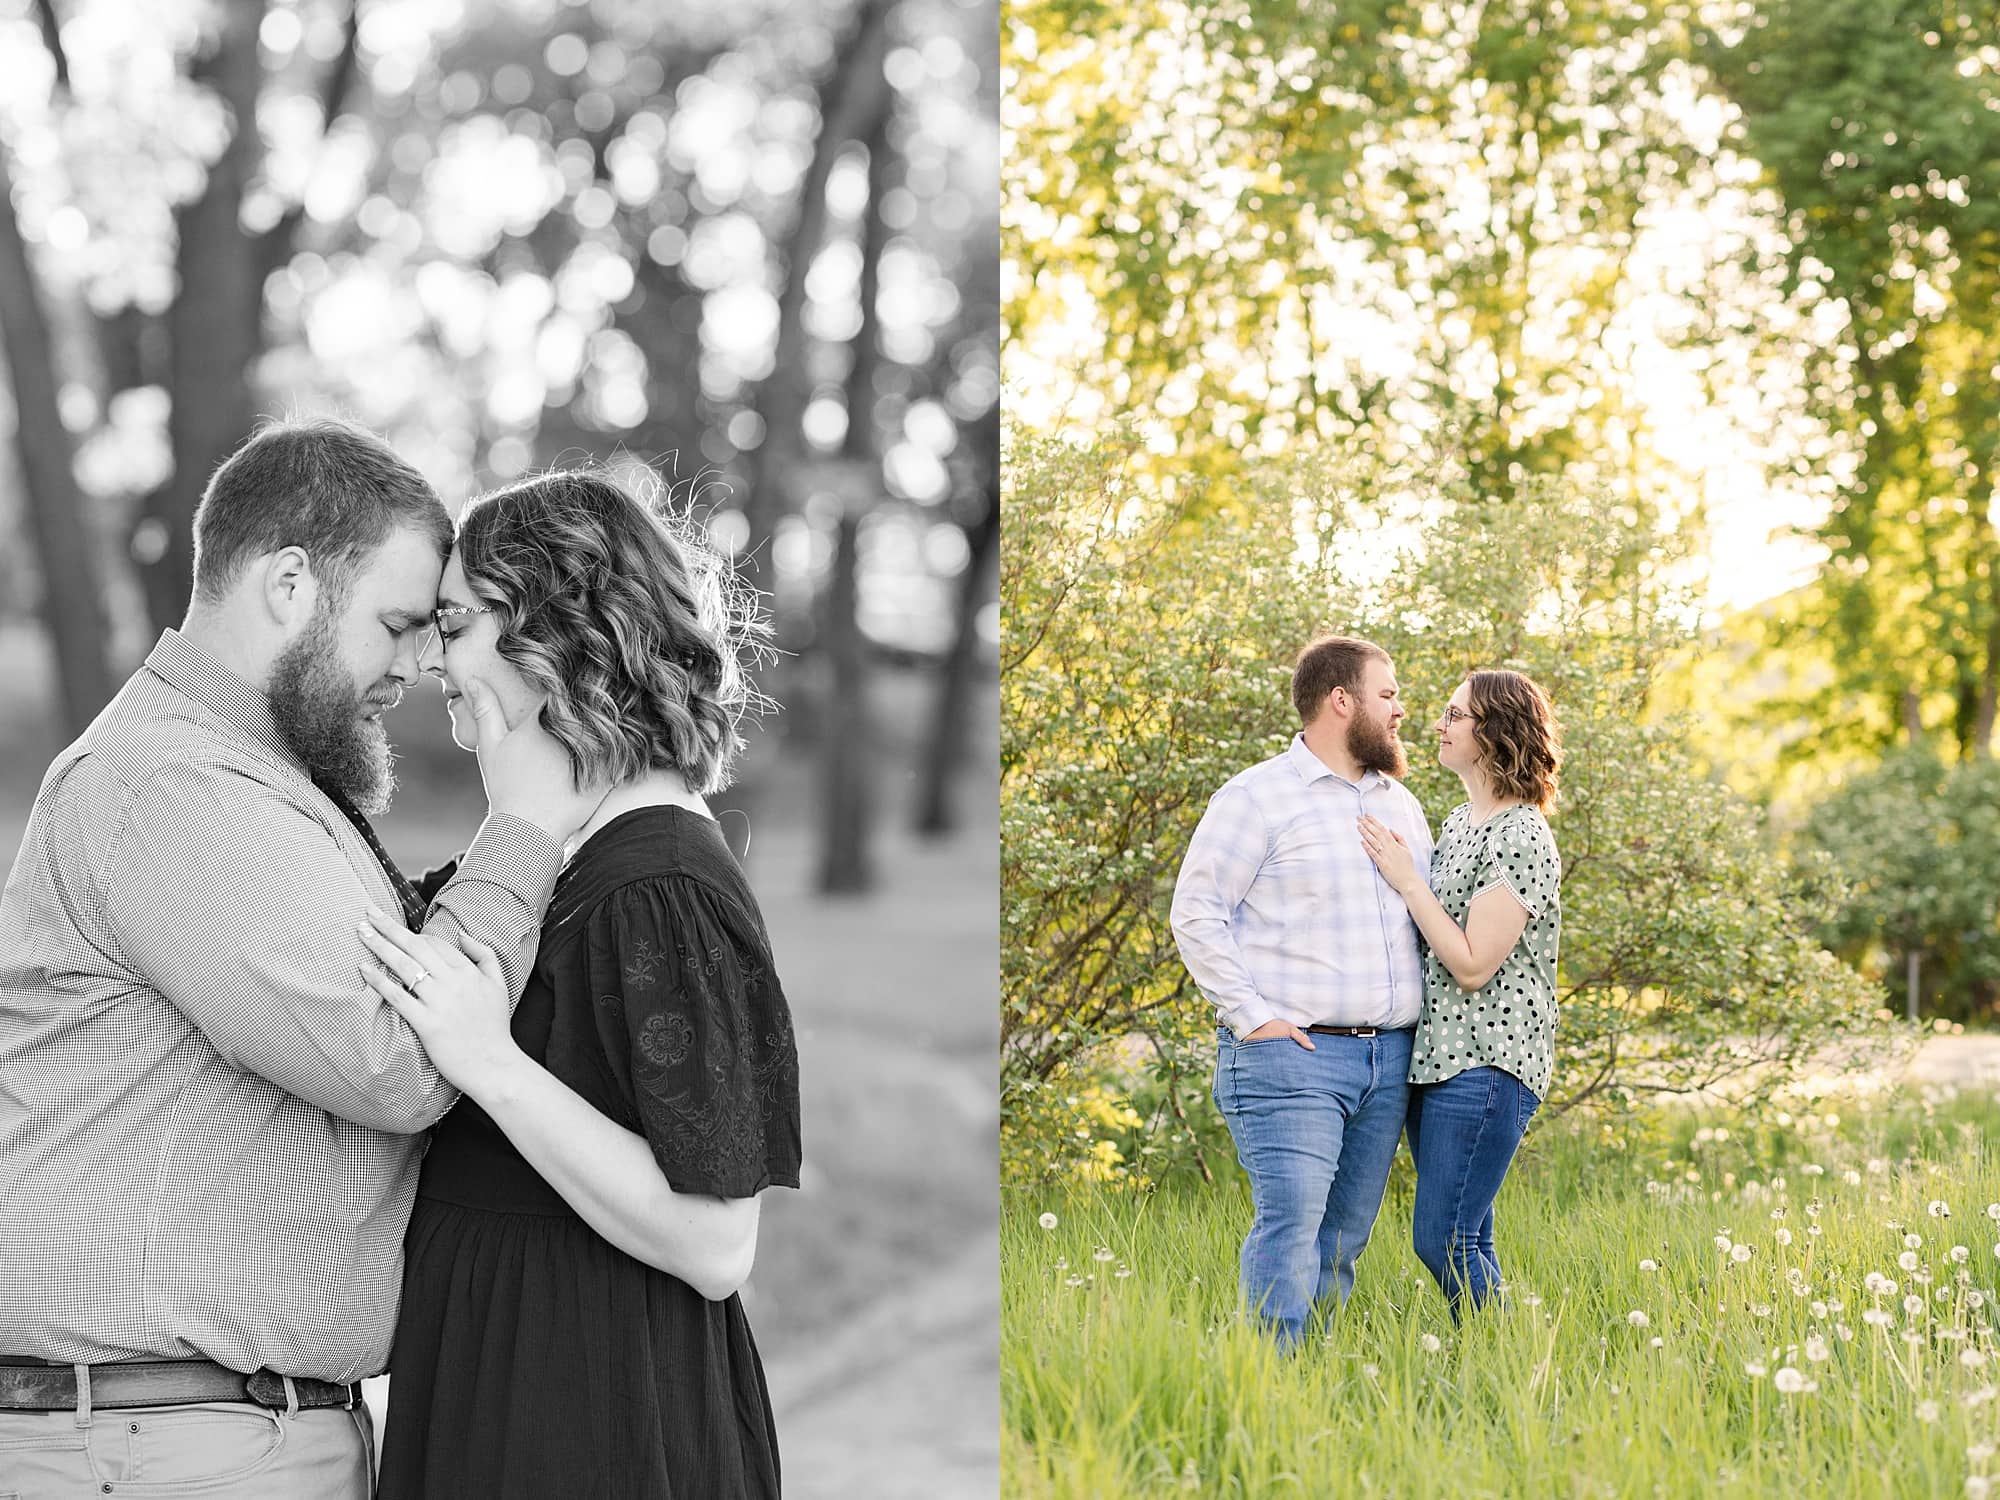 Sunset engagement session at Orchard Glen Park with a newly engaged couple in the tall grass